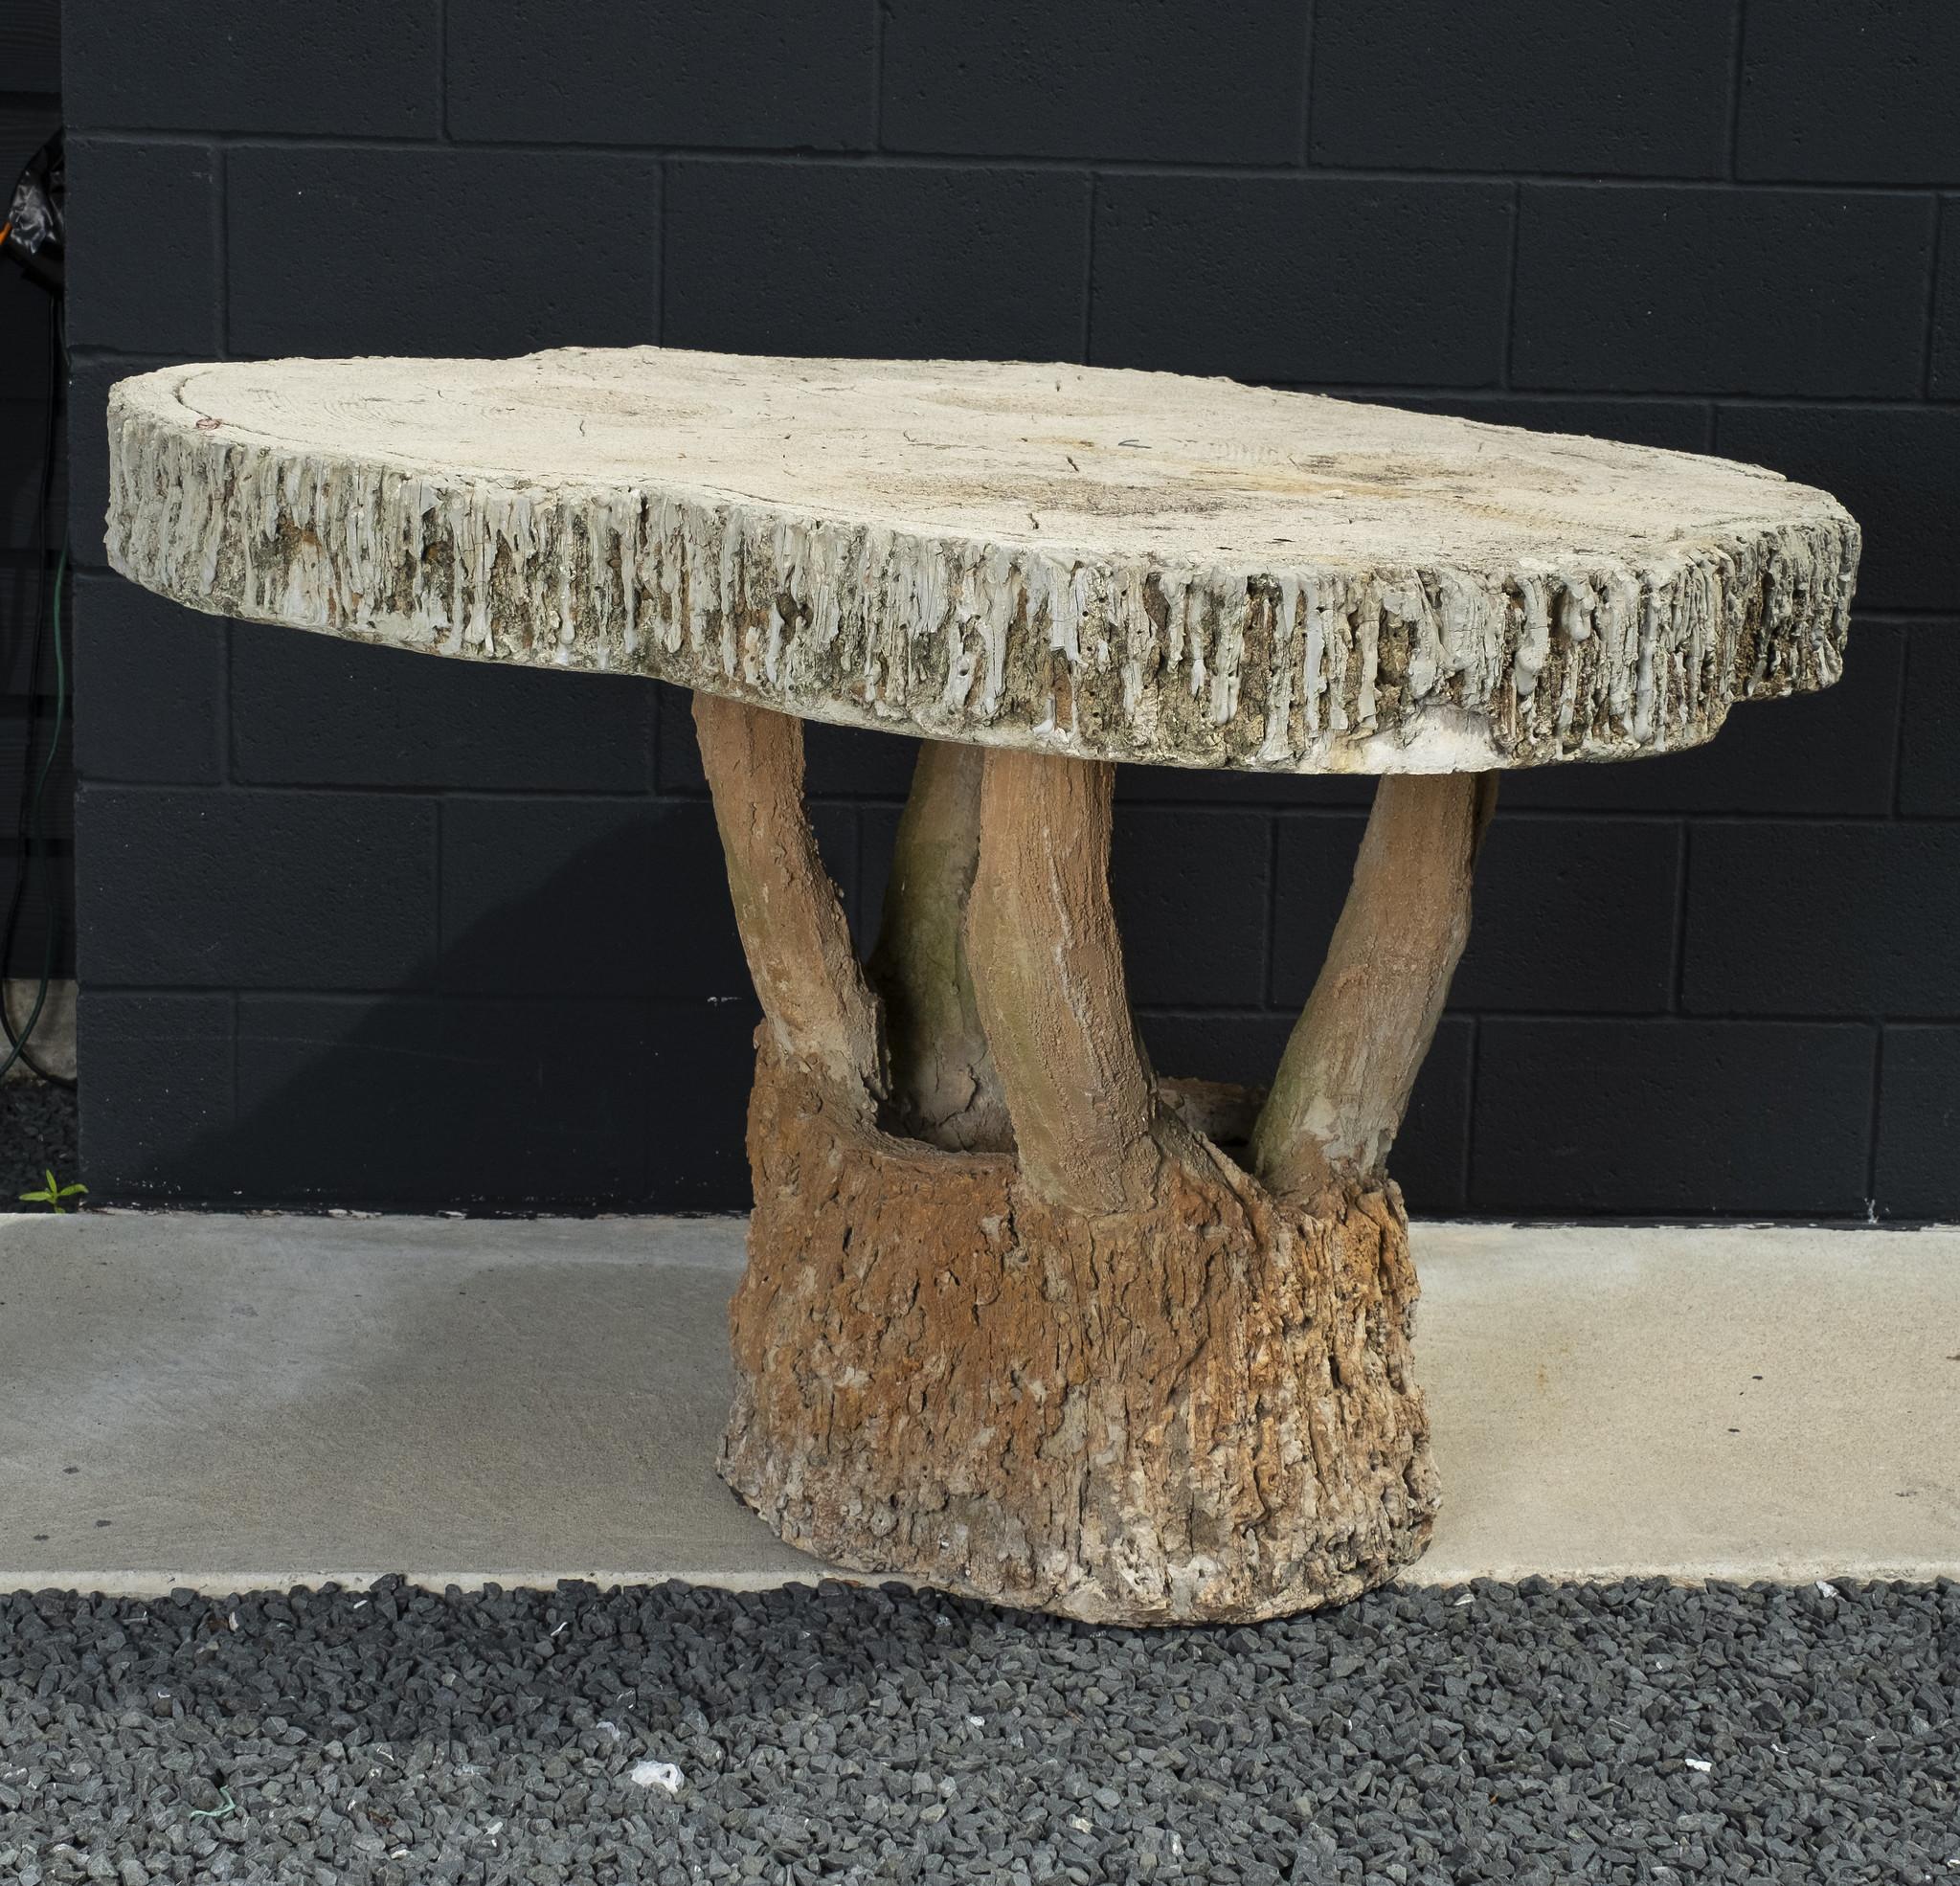 A massive vintage concrete faux bois garden table. Incredibly life-like bark is featured on this rustic French table. This lovely table is constructed in a one piece whimsical manner and has a 5